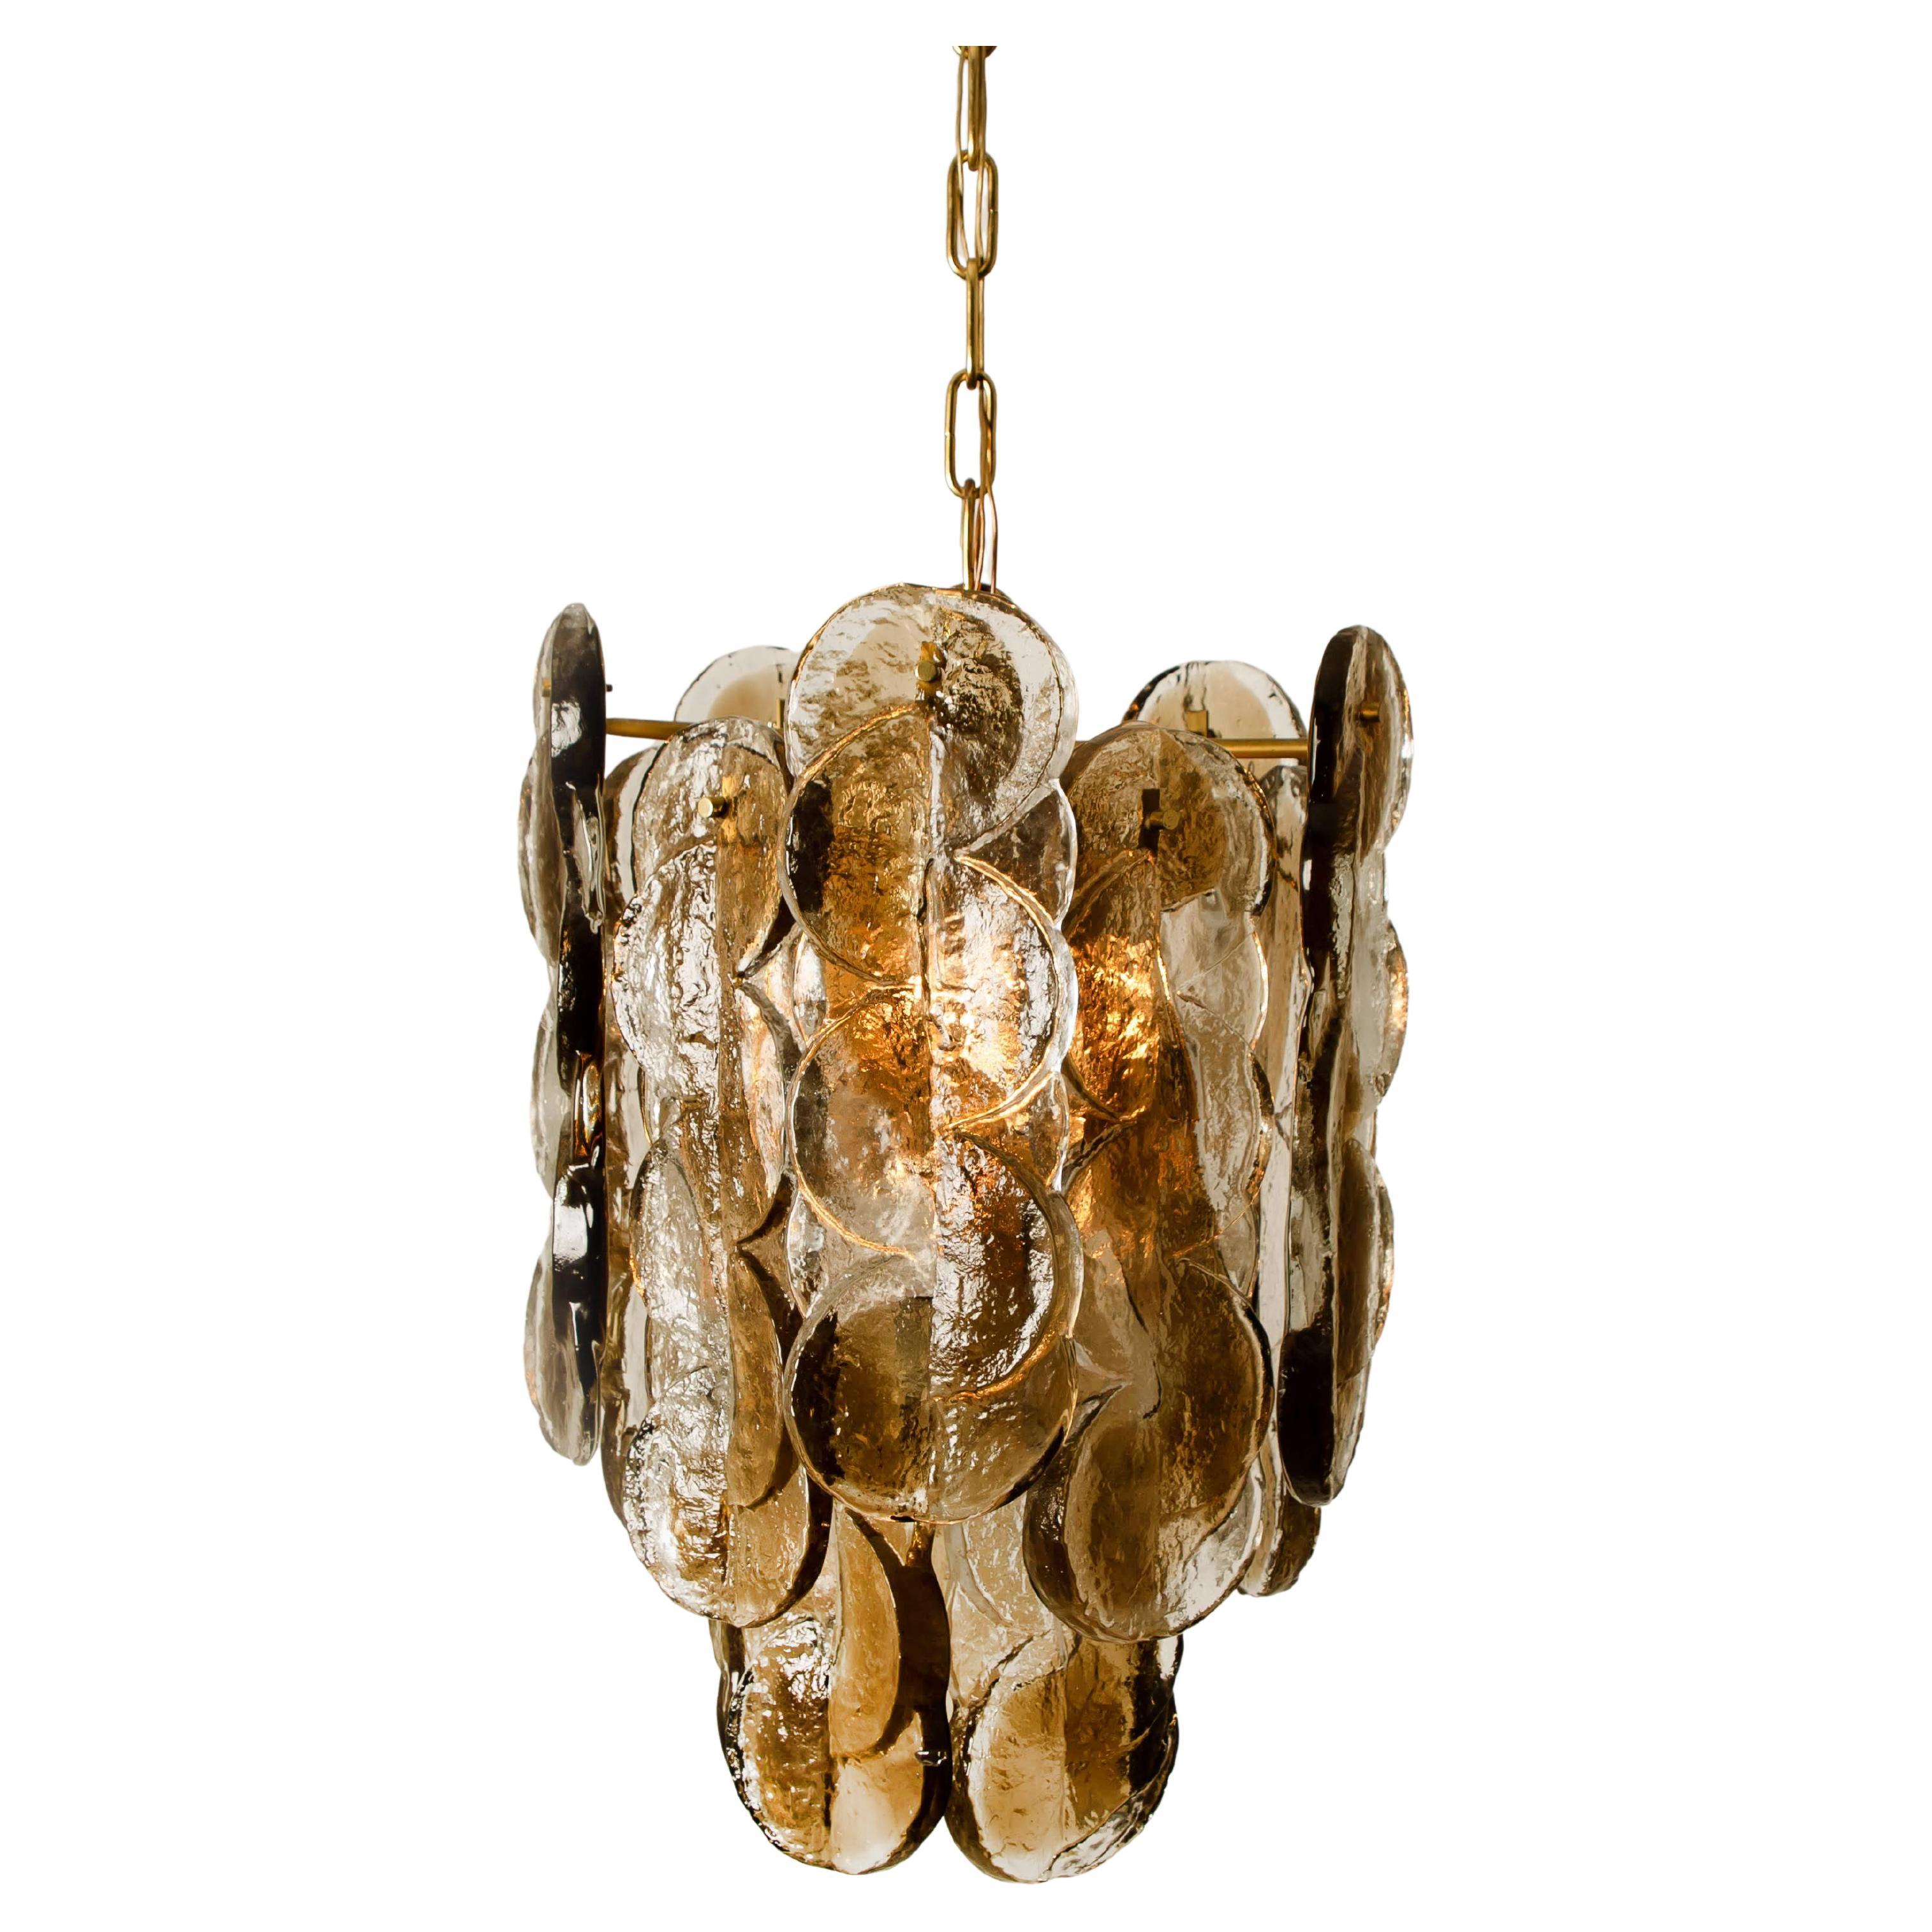 Pair of high quality murano glass chandeliers by Kalmar, 1960s smoked swirl ice glass, clear twisted crystal glass panels with a light gold dish amber colored stripe in it.

Kalmar was the most important producer of premium-quality chandeliers in